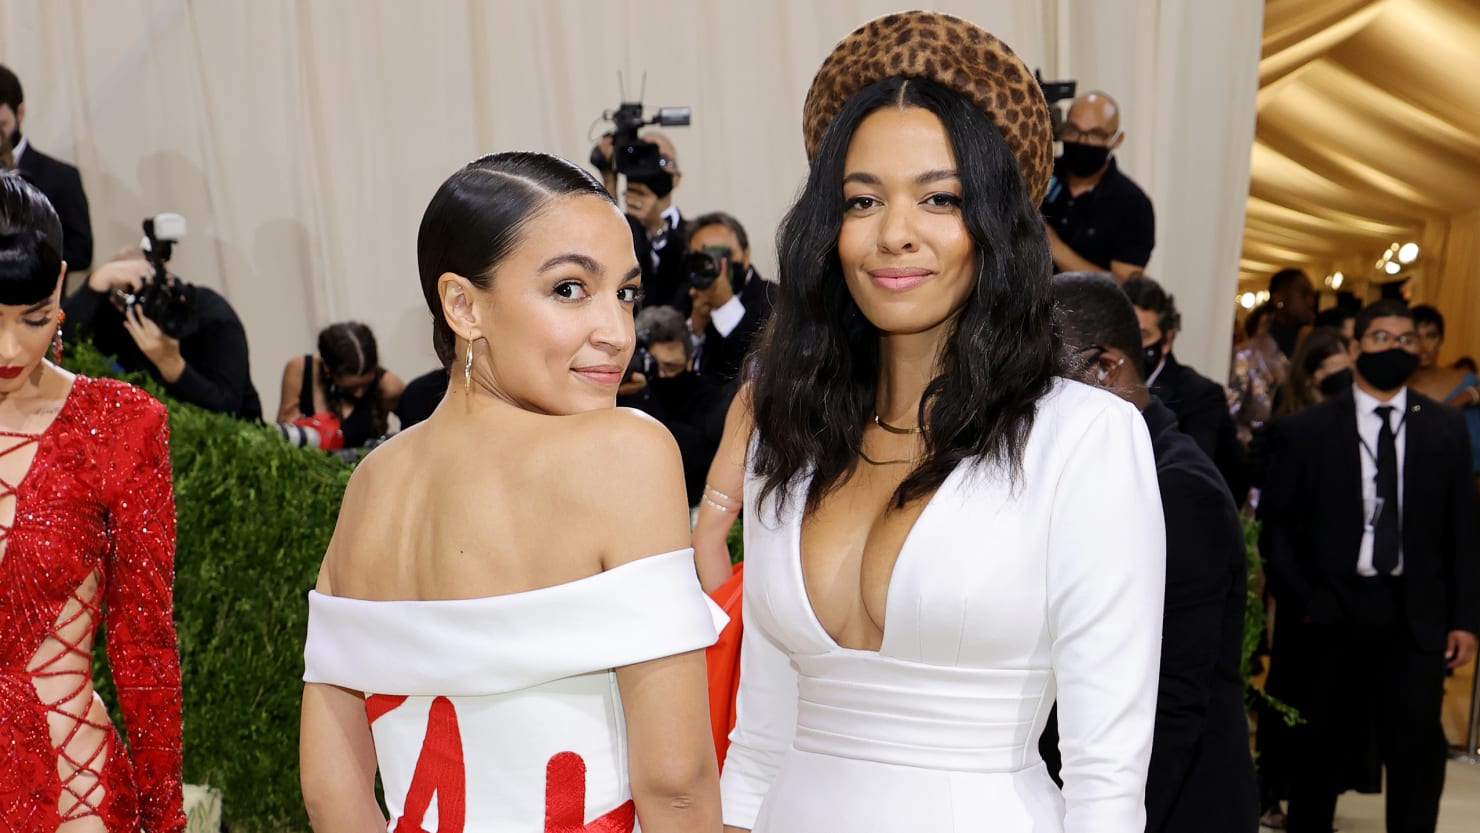 Alexandria Ocasio-Cortez wears the “Tax the Rich” costume at the Met Gala